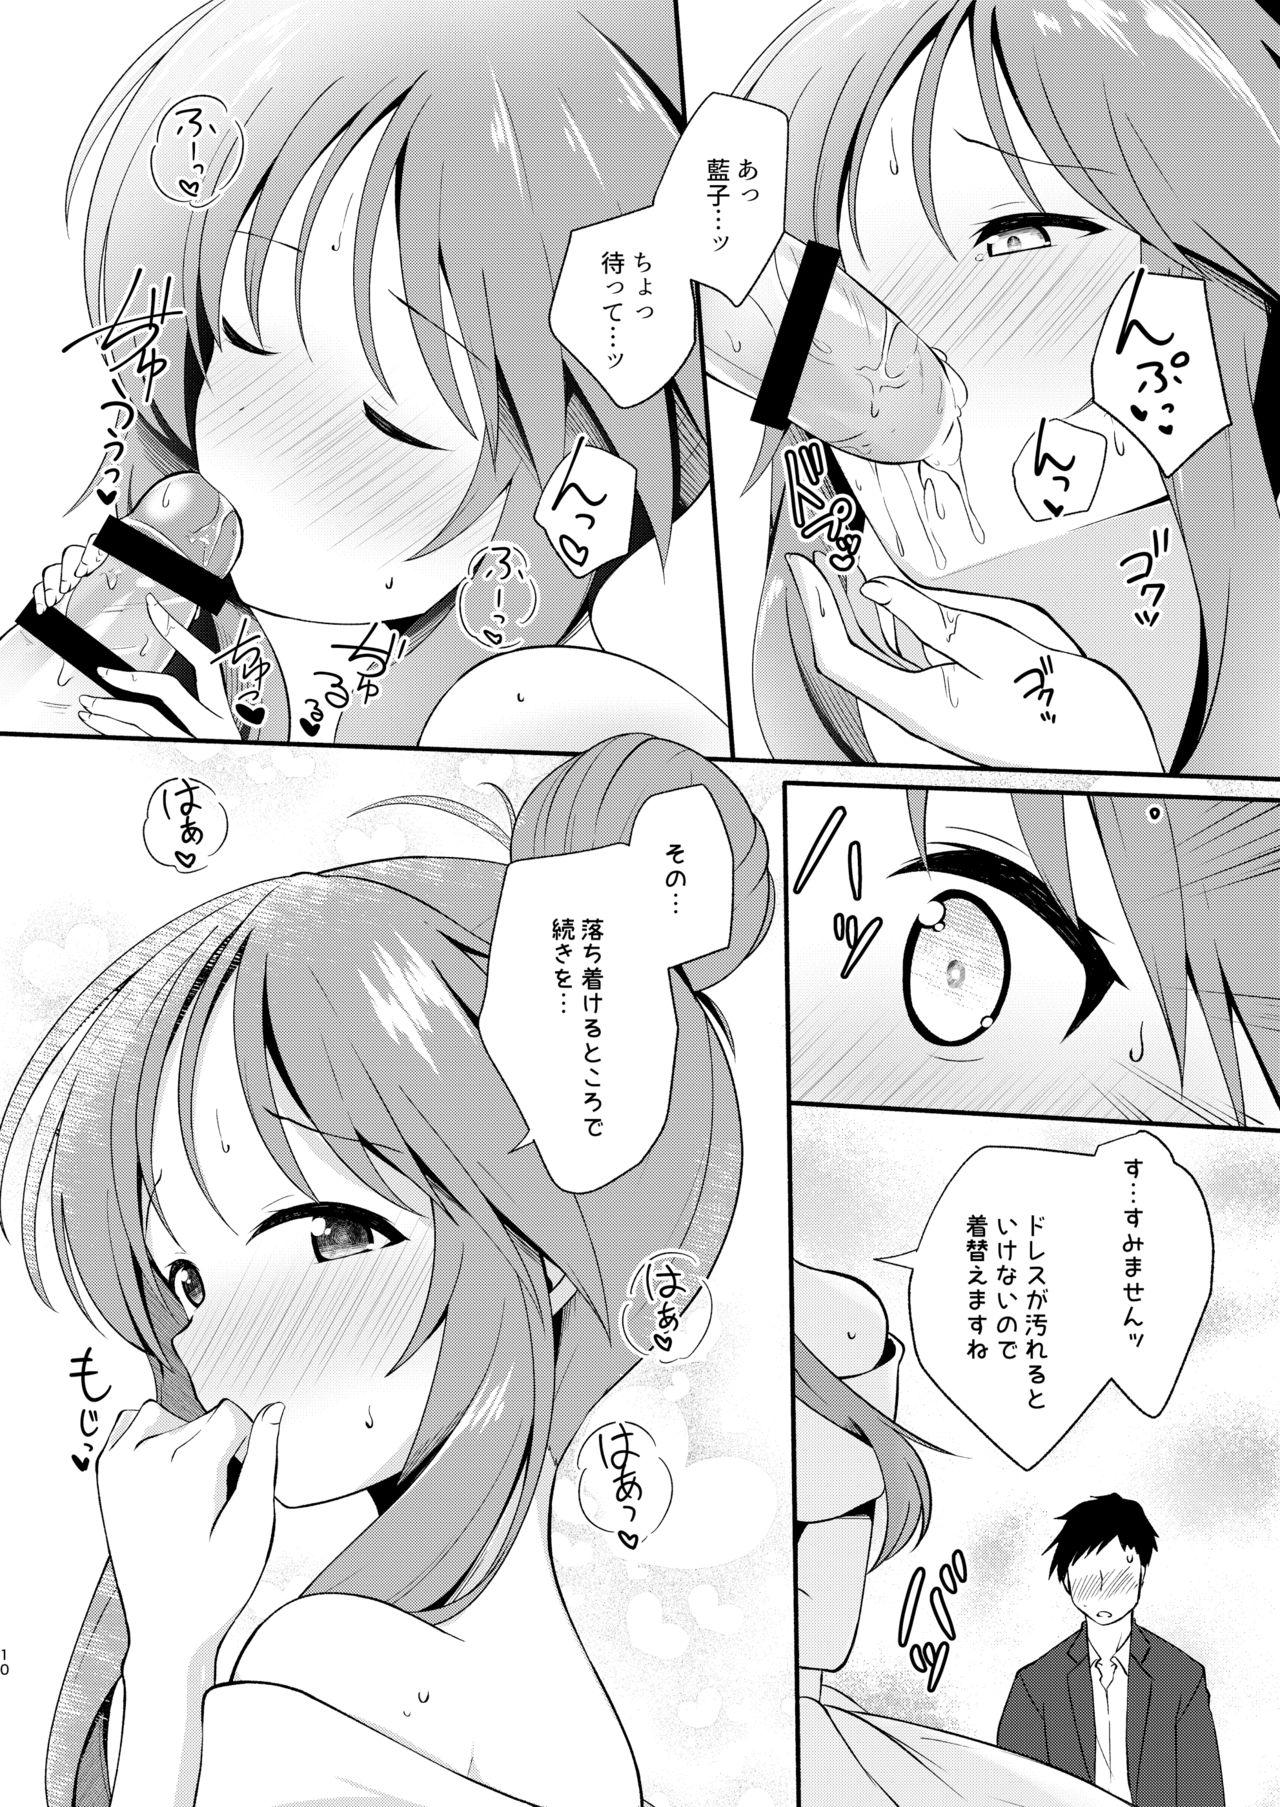 Chilena Aiko Myu Endless 8 - The idolmaster Handsome - Page 10